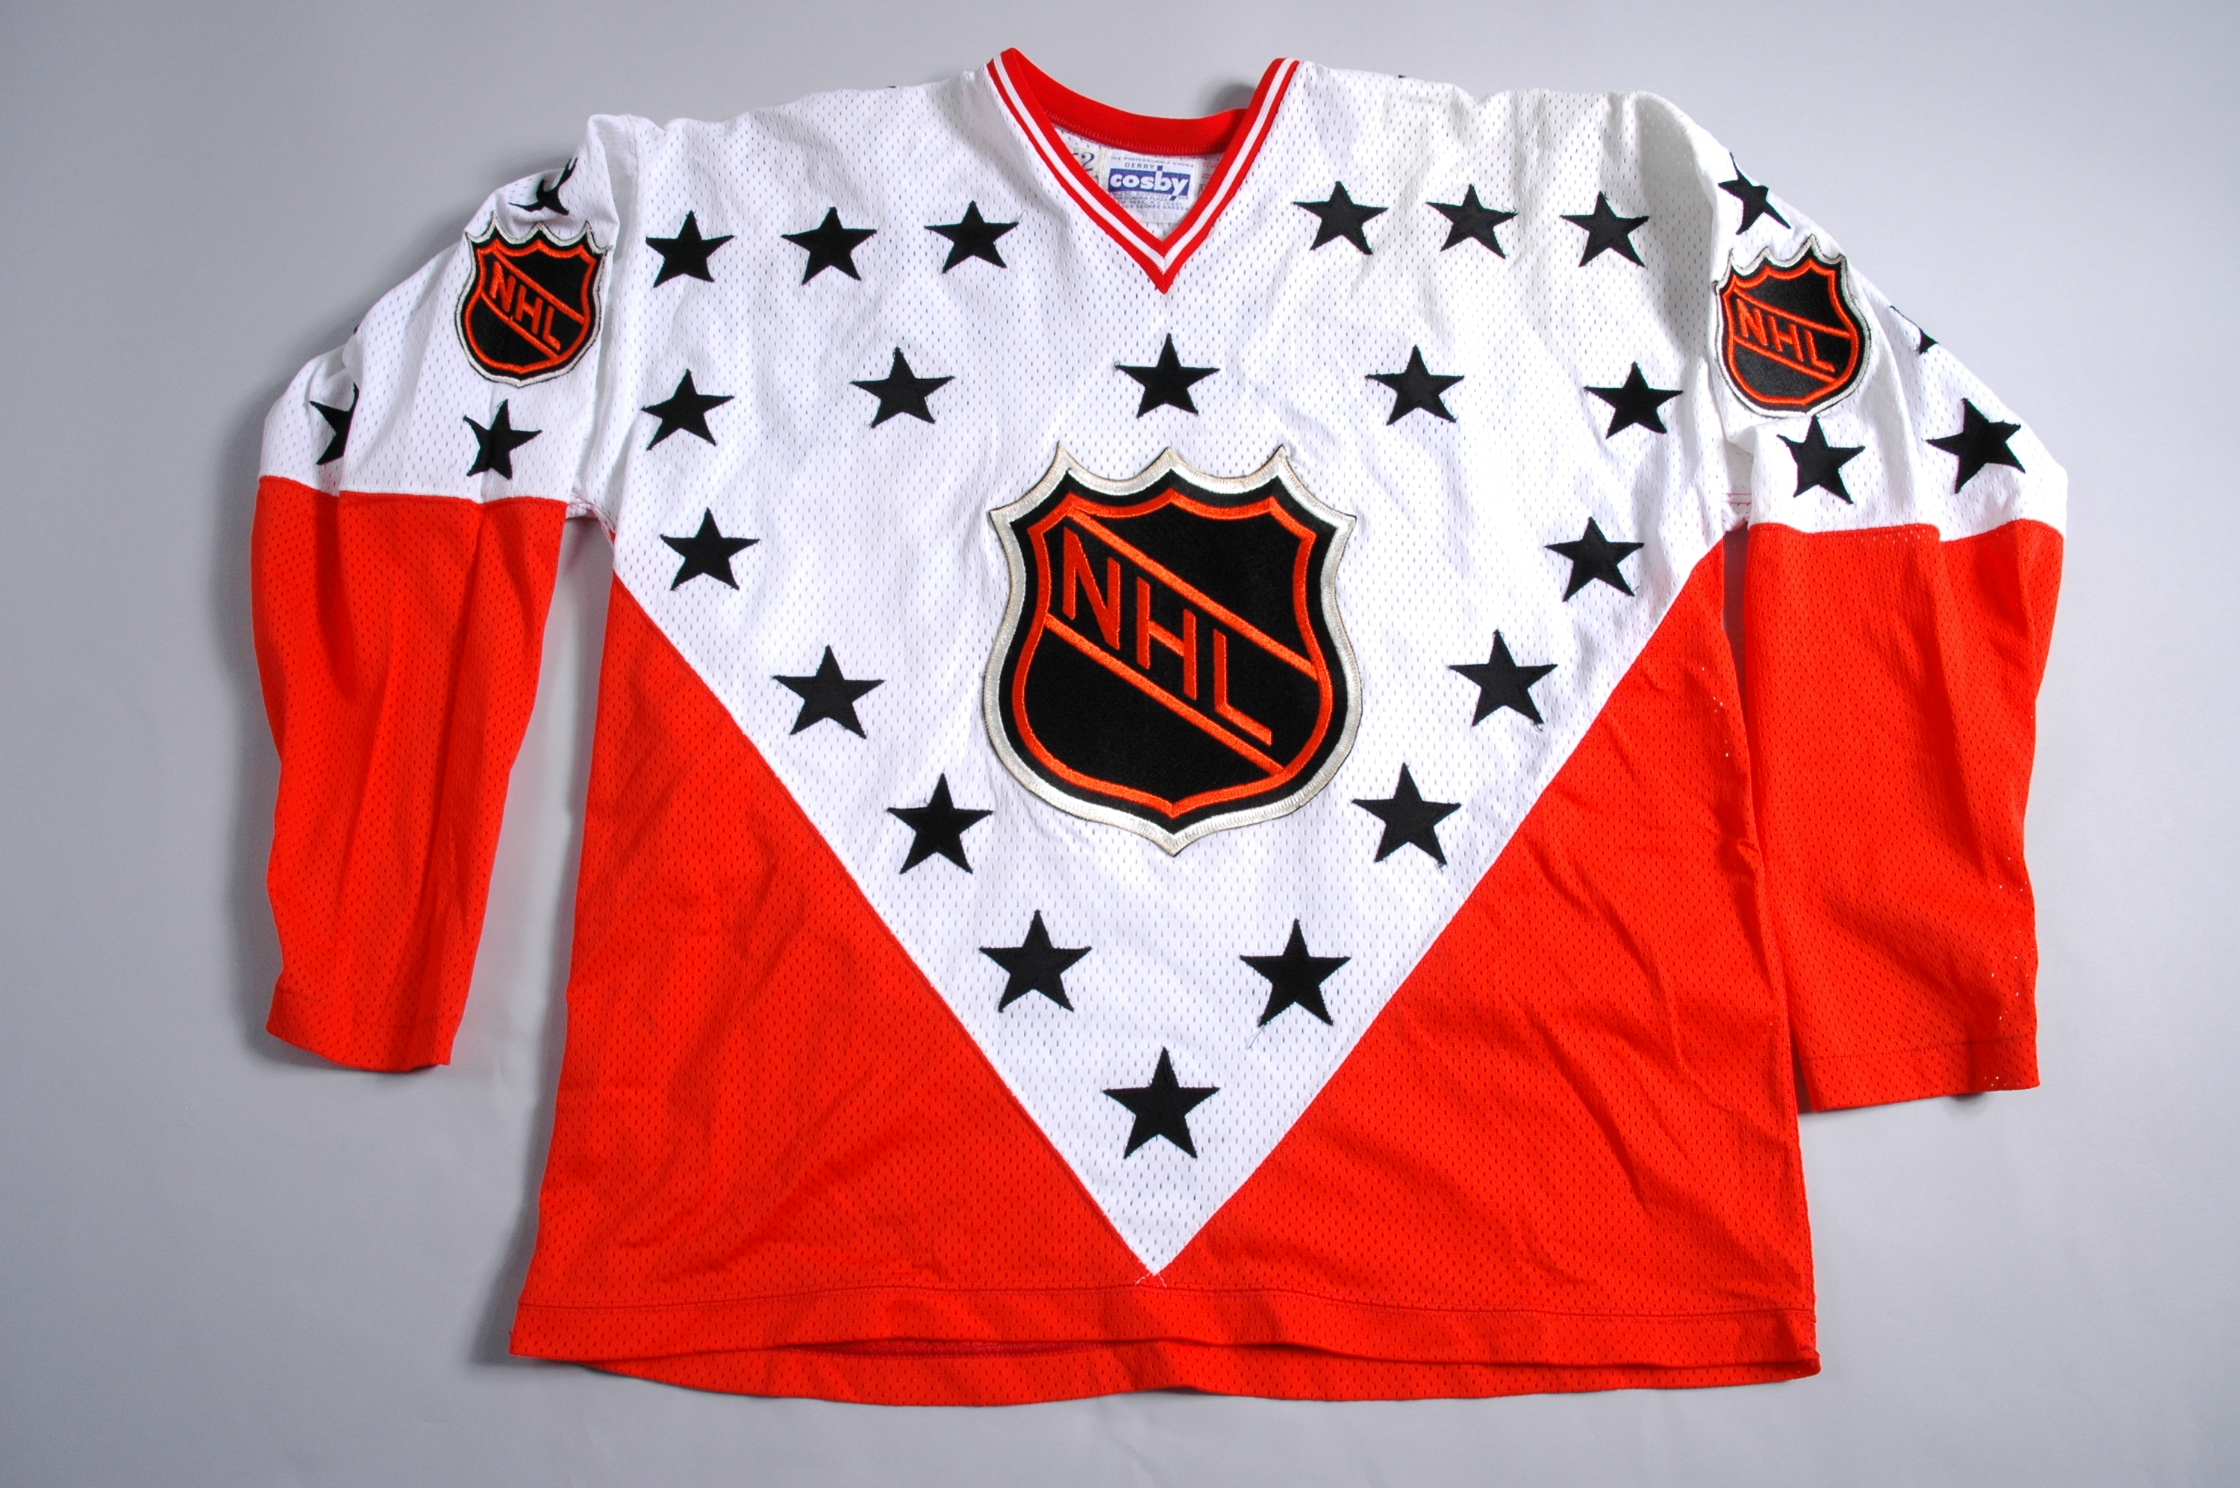 1985 Wales Conf. NHL All-Star Jersey